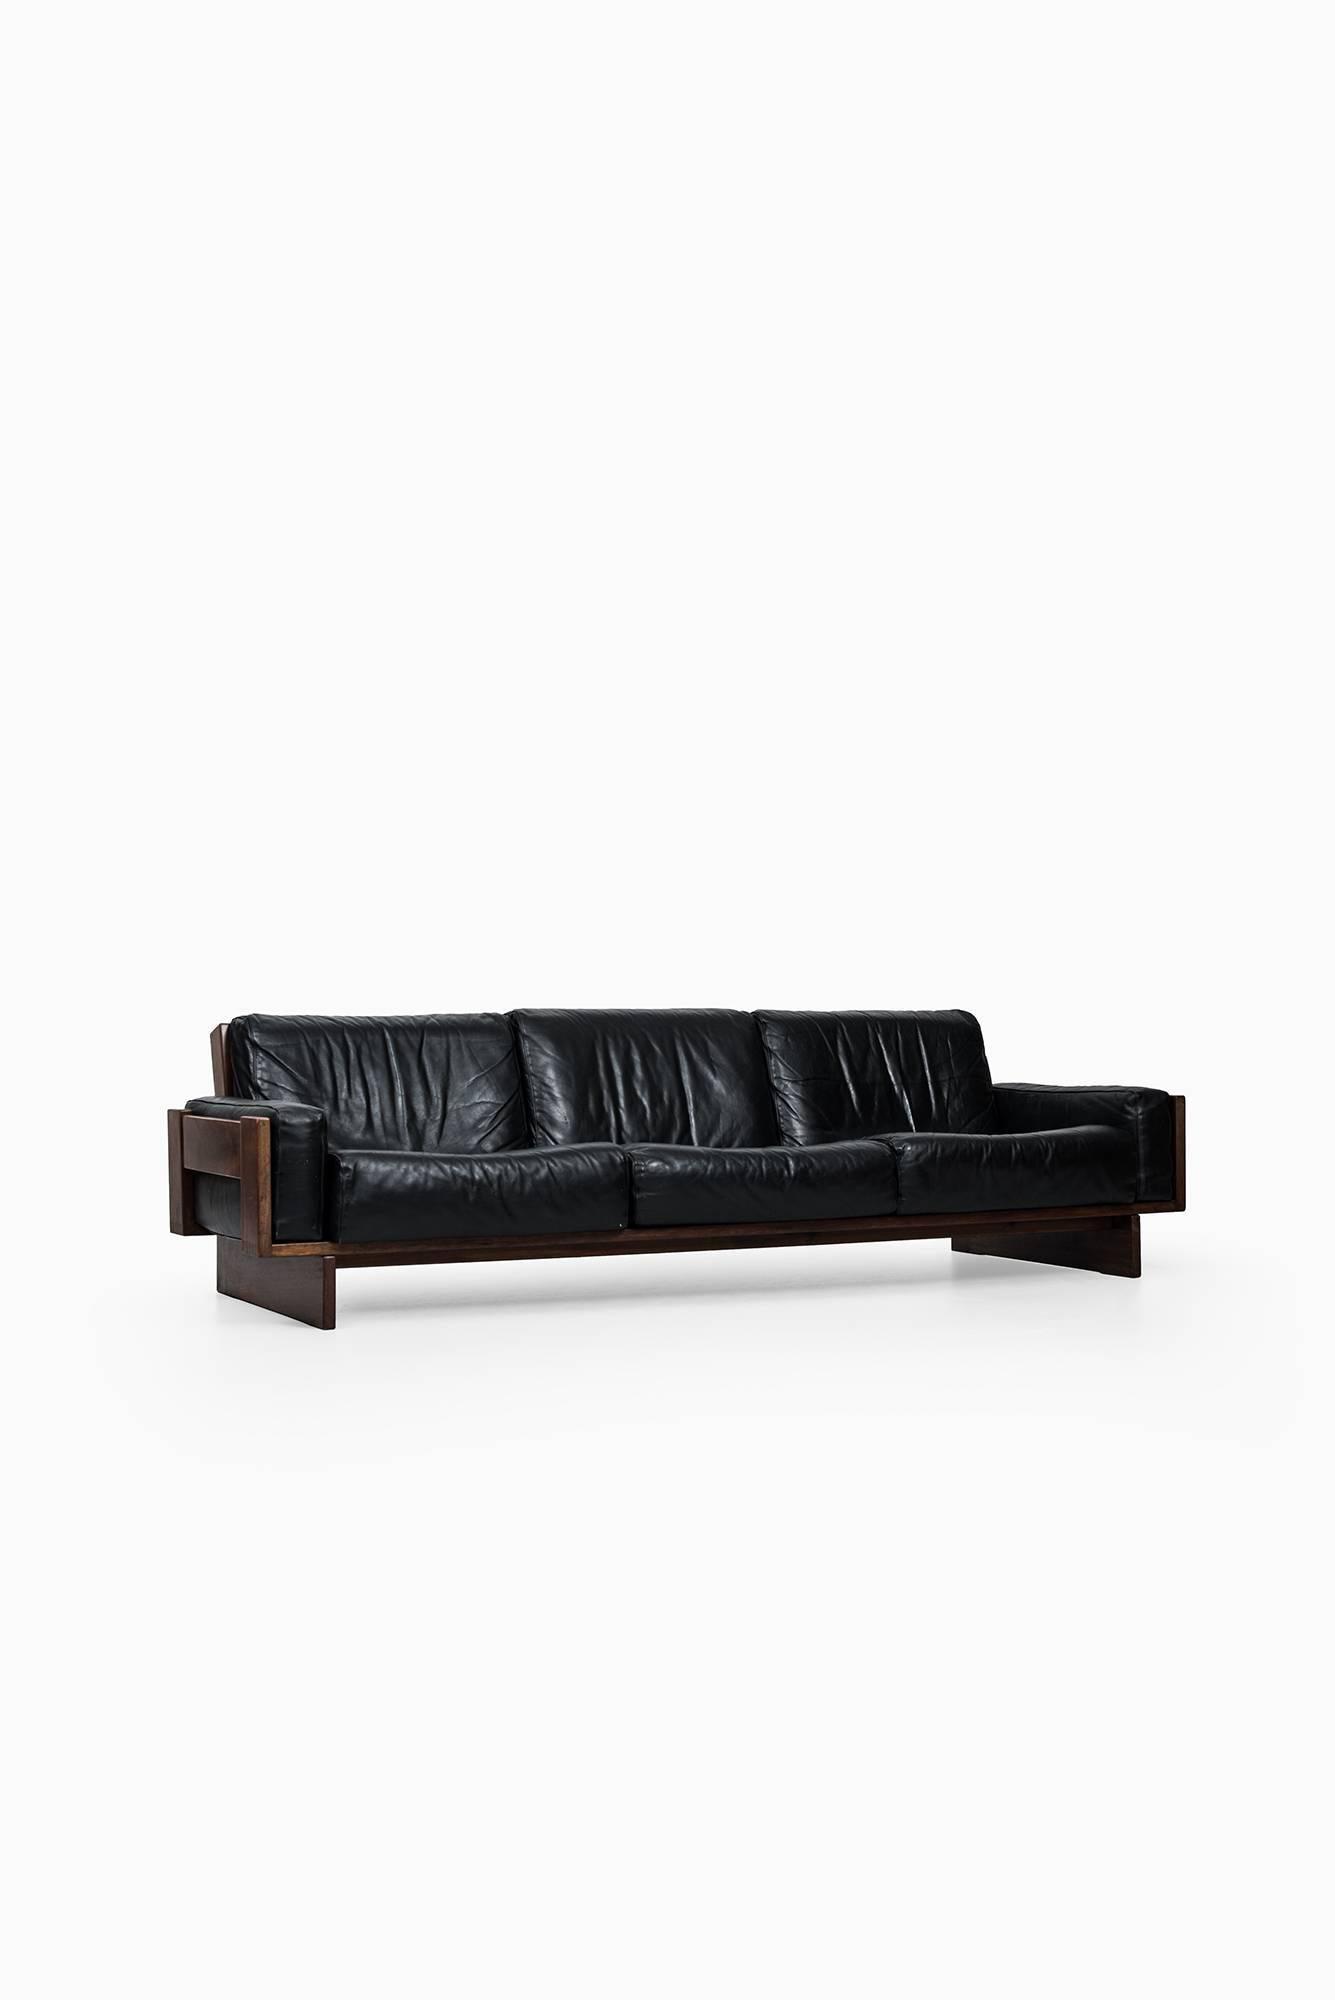 Norwegian Long Three-Seat Sofa designed by Peter Opsvik and produced in Norway